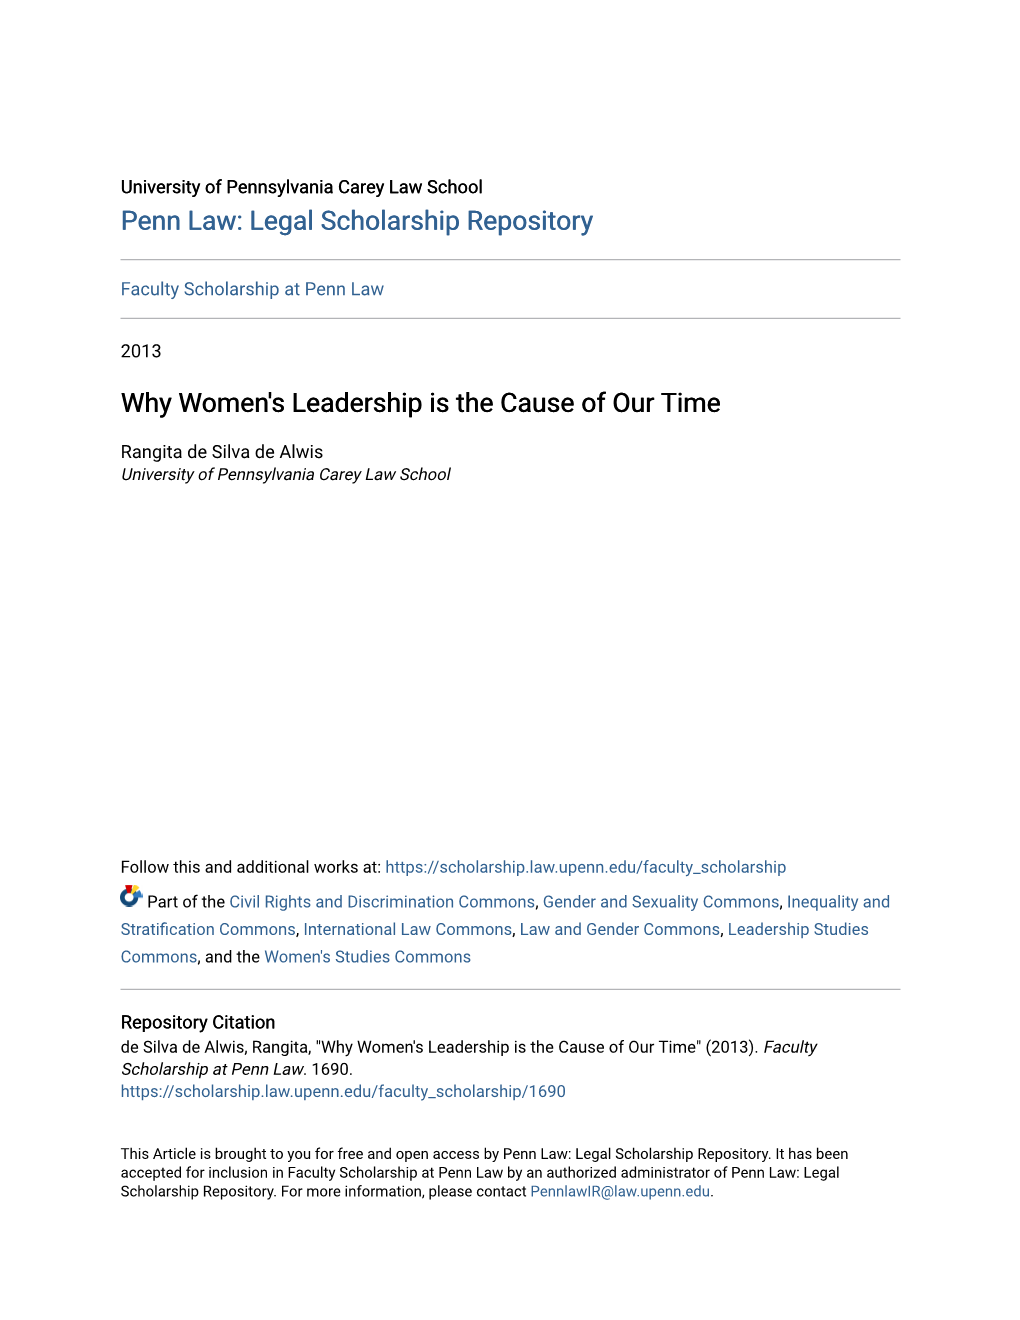 Why Women's Leadership Is the Cause of Our Time